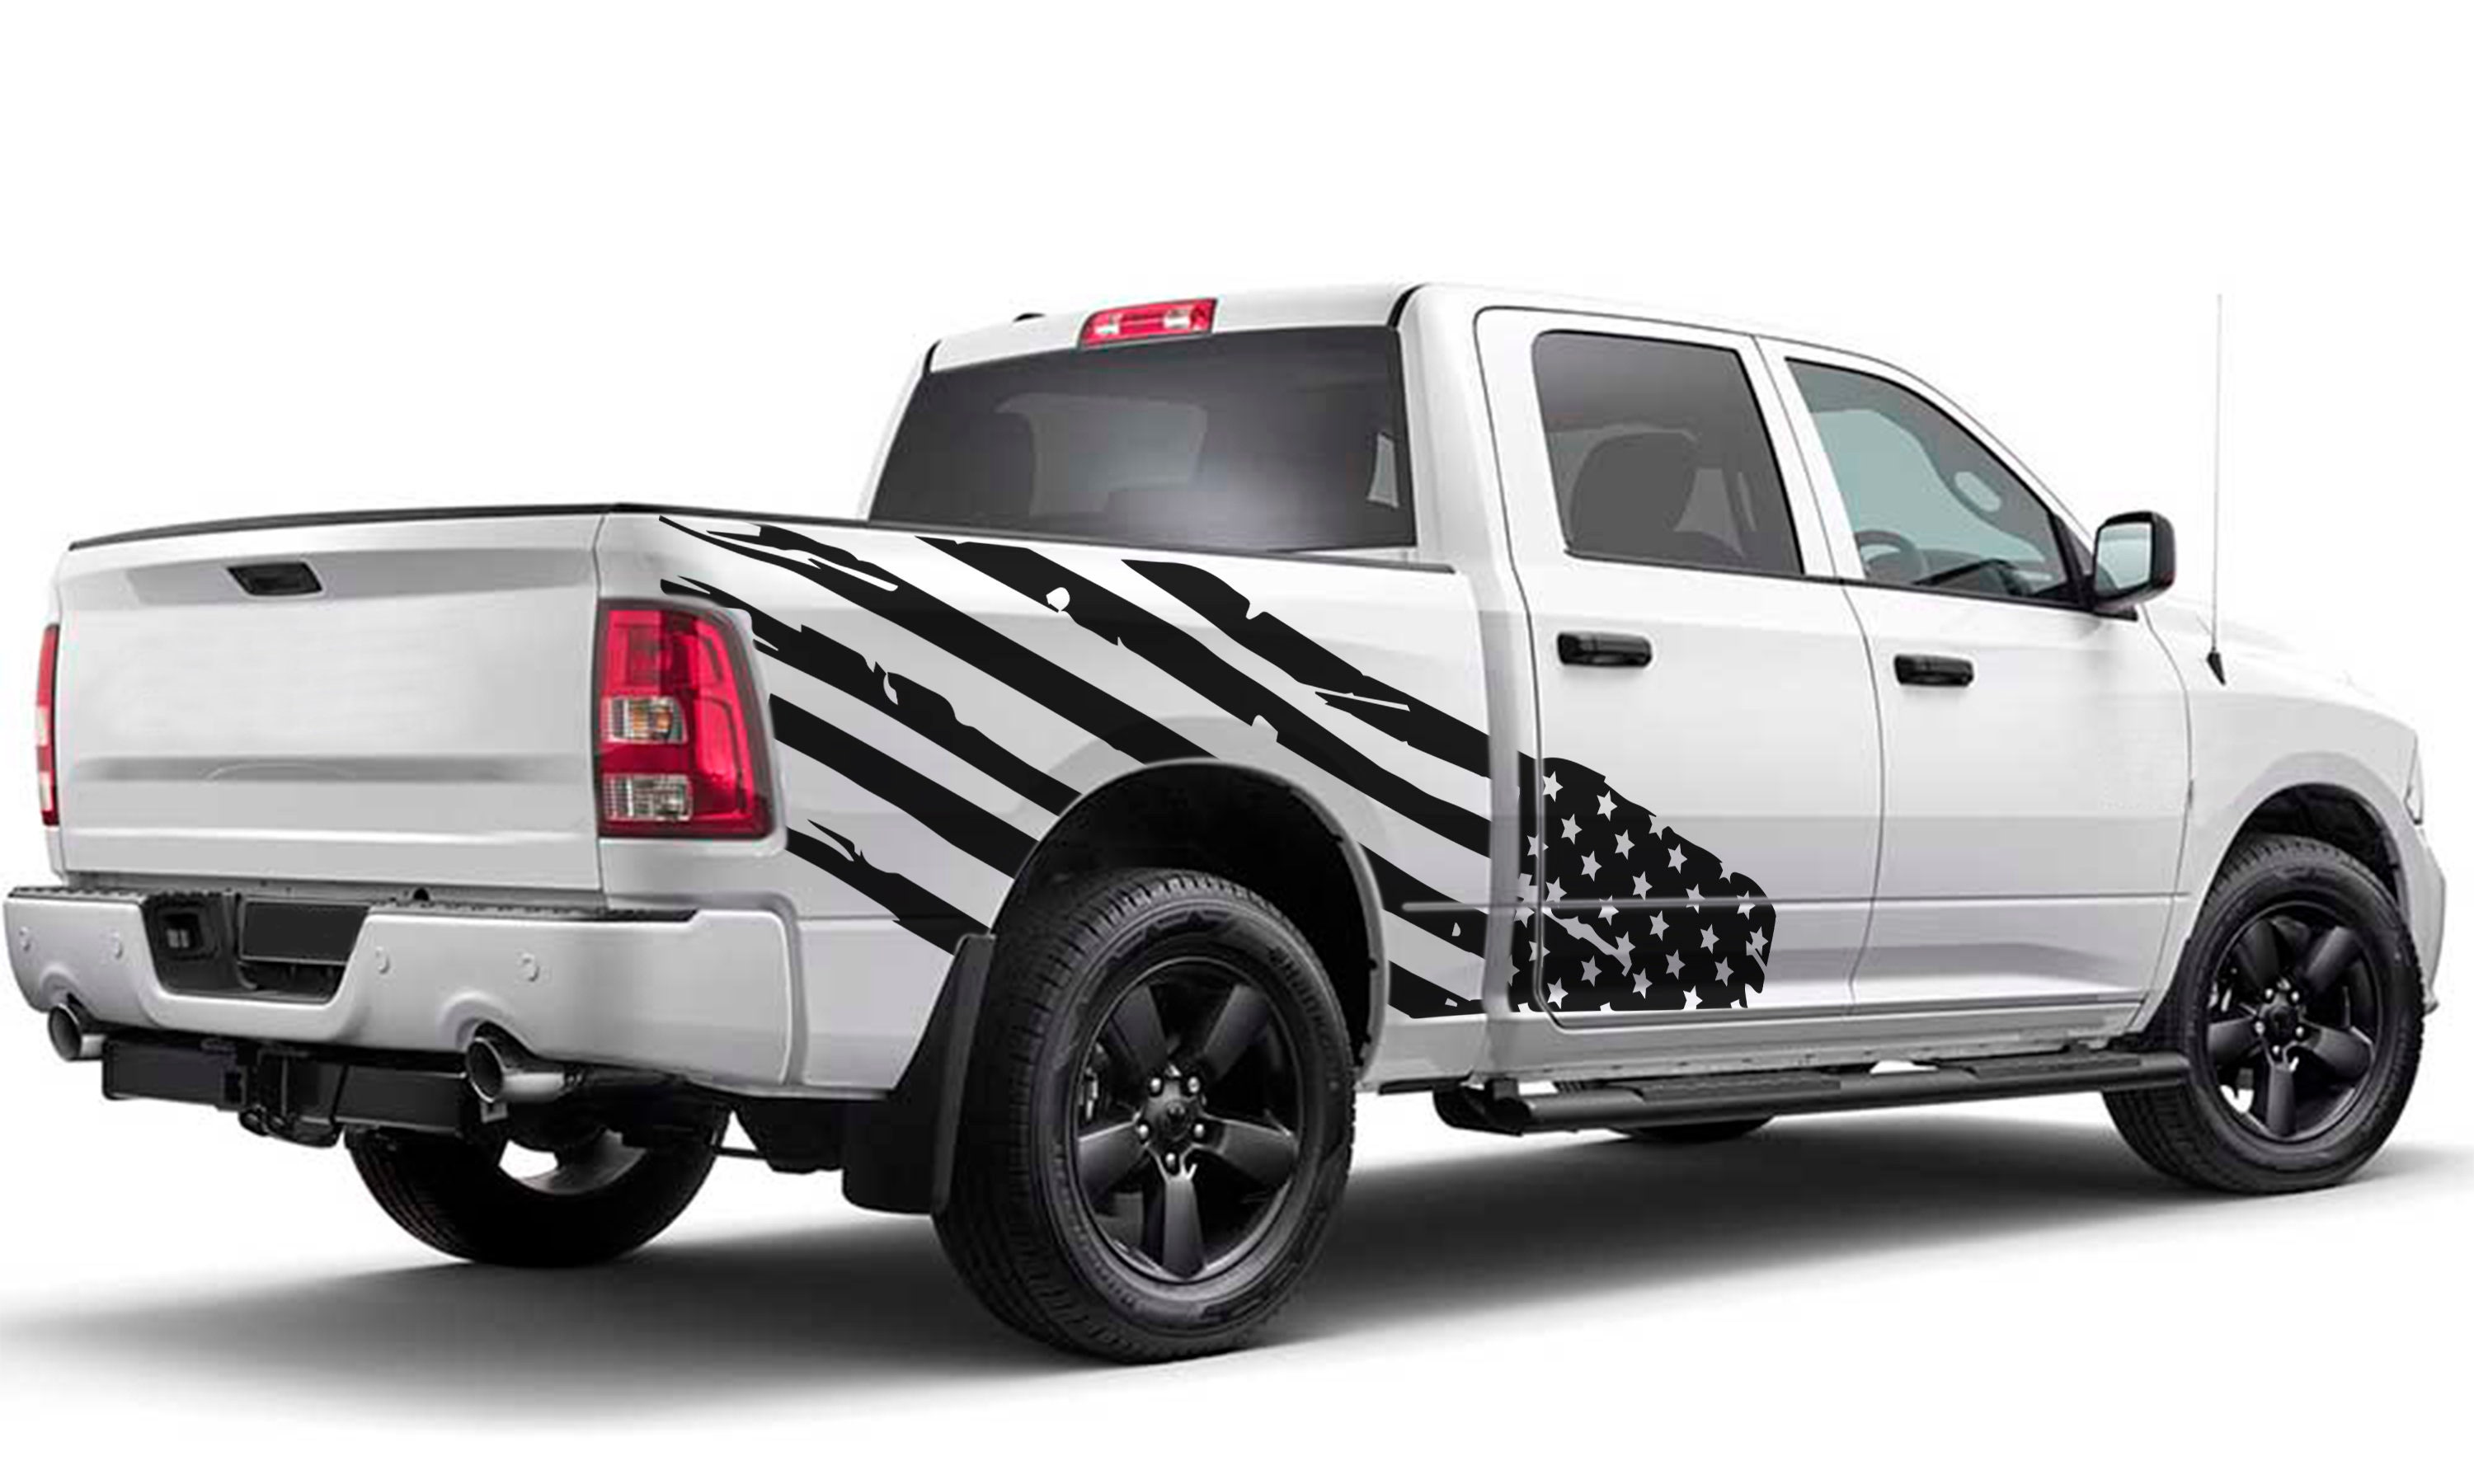 Side Vinyl Decal Us Flag Sticker American Compatible With Dodge Ram Srt8 Rt 1500 Crew Cab Gen 3 4 5 2009 - 2021 4x4 Off Road